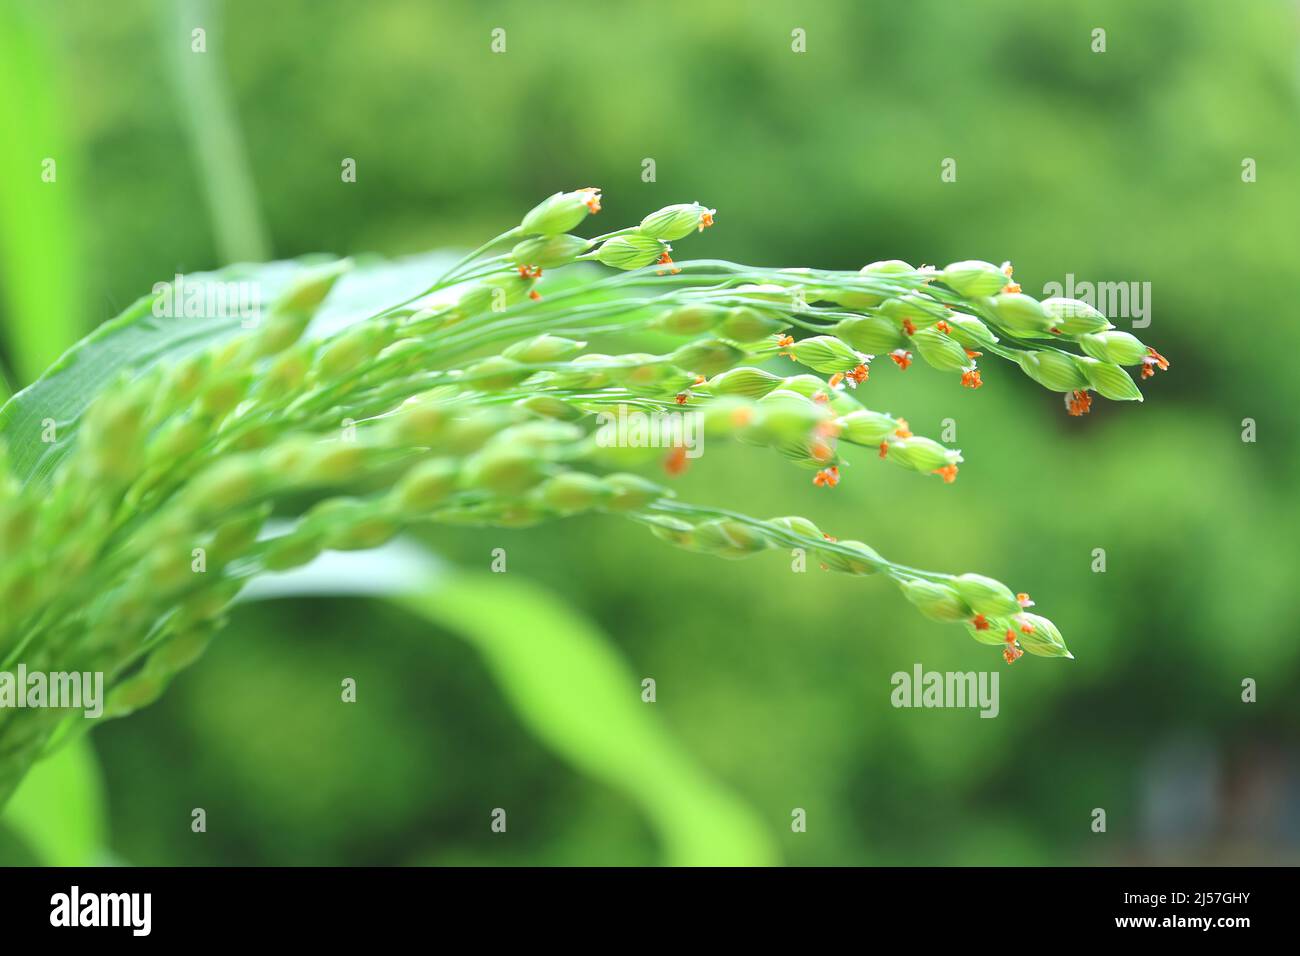 Closeup of Millet Plants with Tiny Flowers Growing in he Sunlight Stock Photo